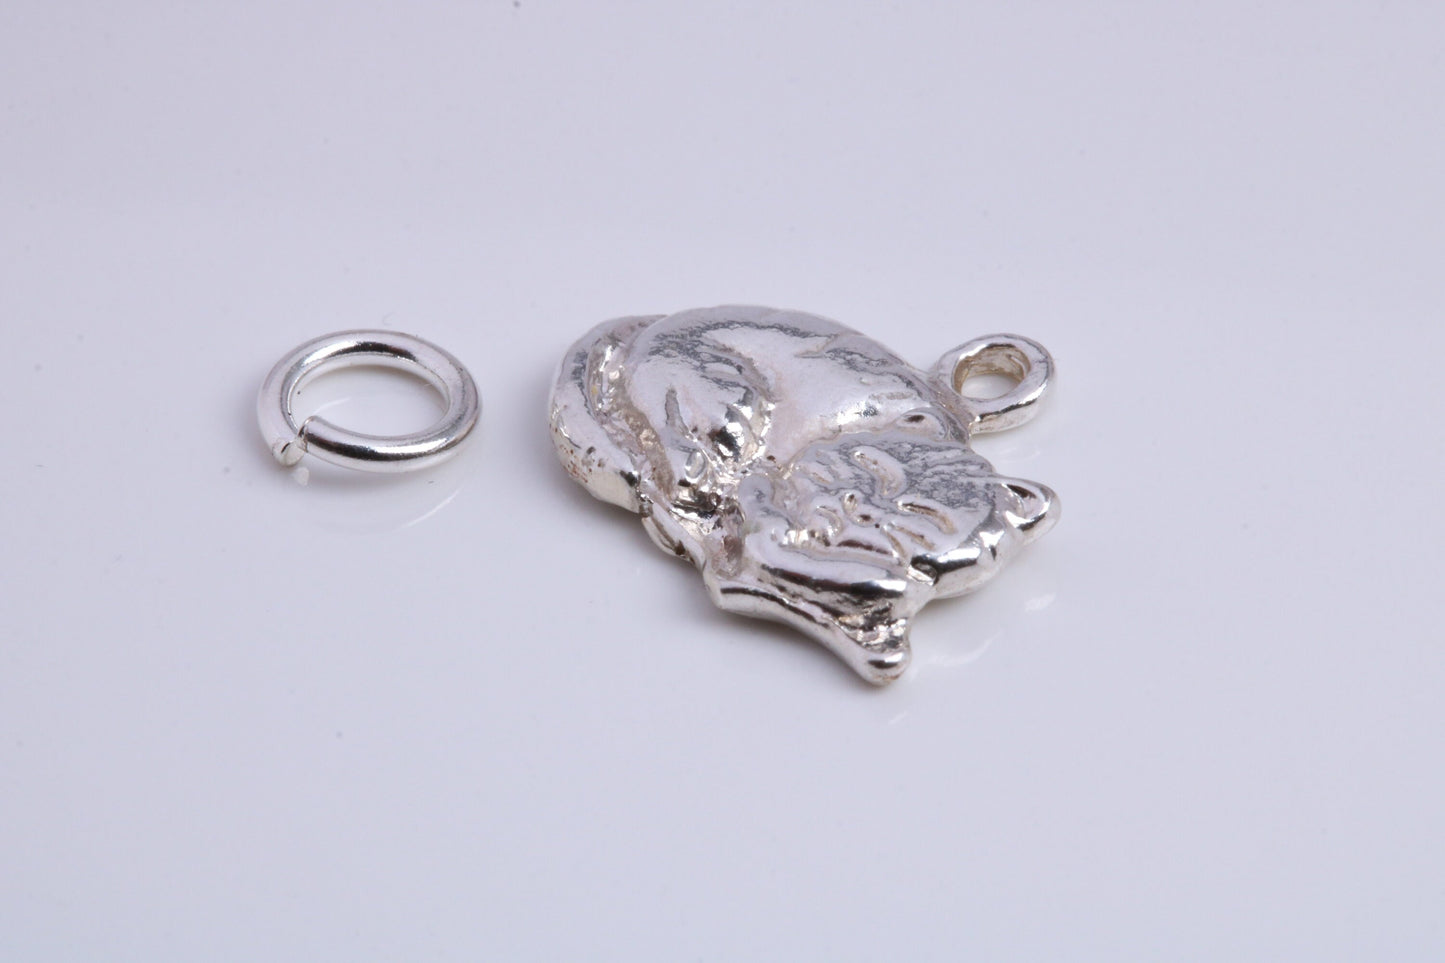 Cat Charm, Traditional Charm, Made from Solid 925 Grade Sterling Silver, Complete with Attachment Link